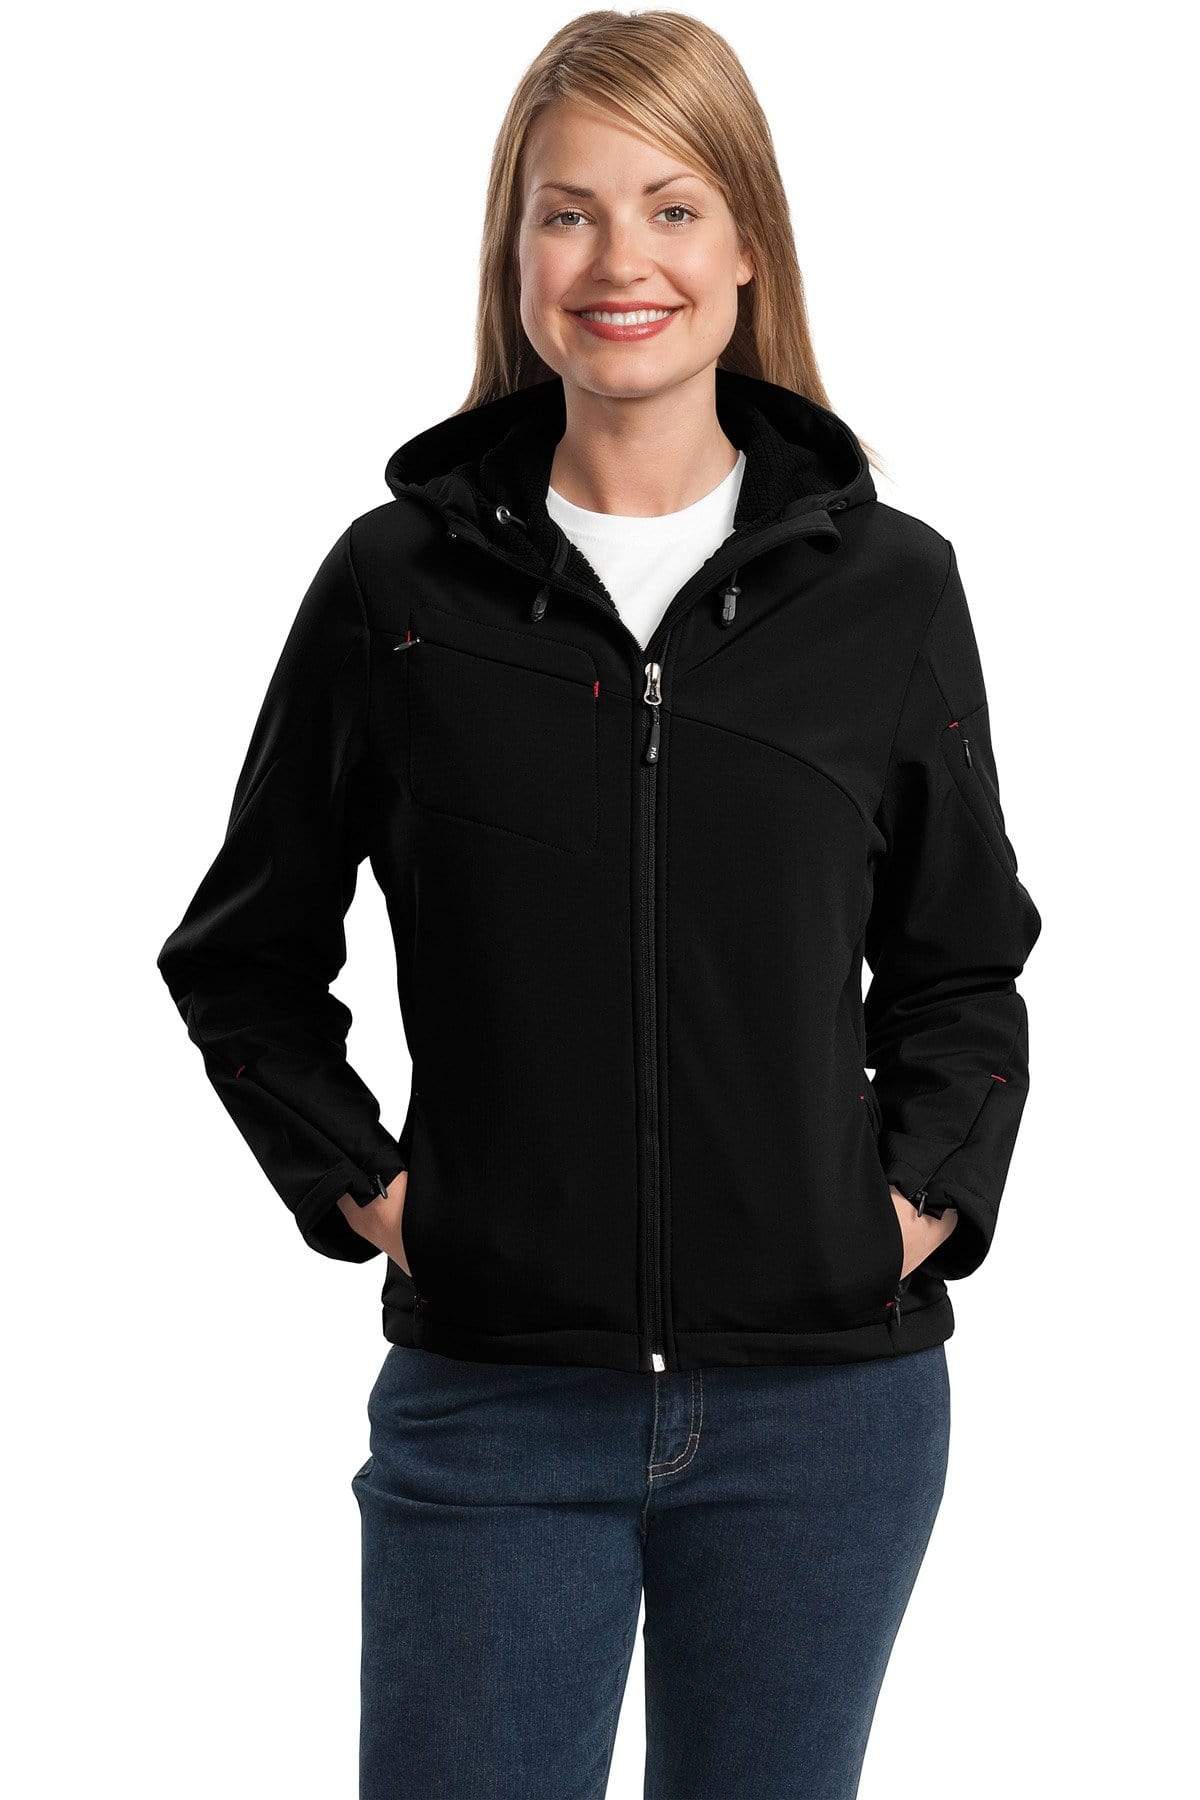 Port Authority Women's Hooded Soft Shell Jacket L7067621